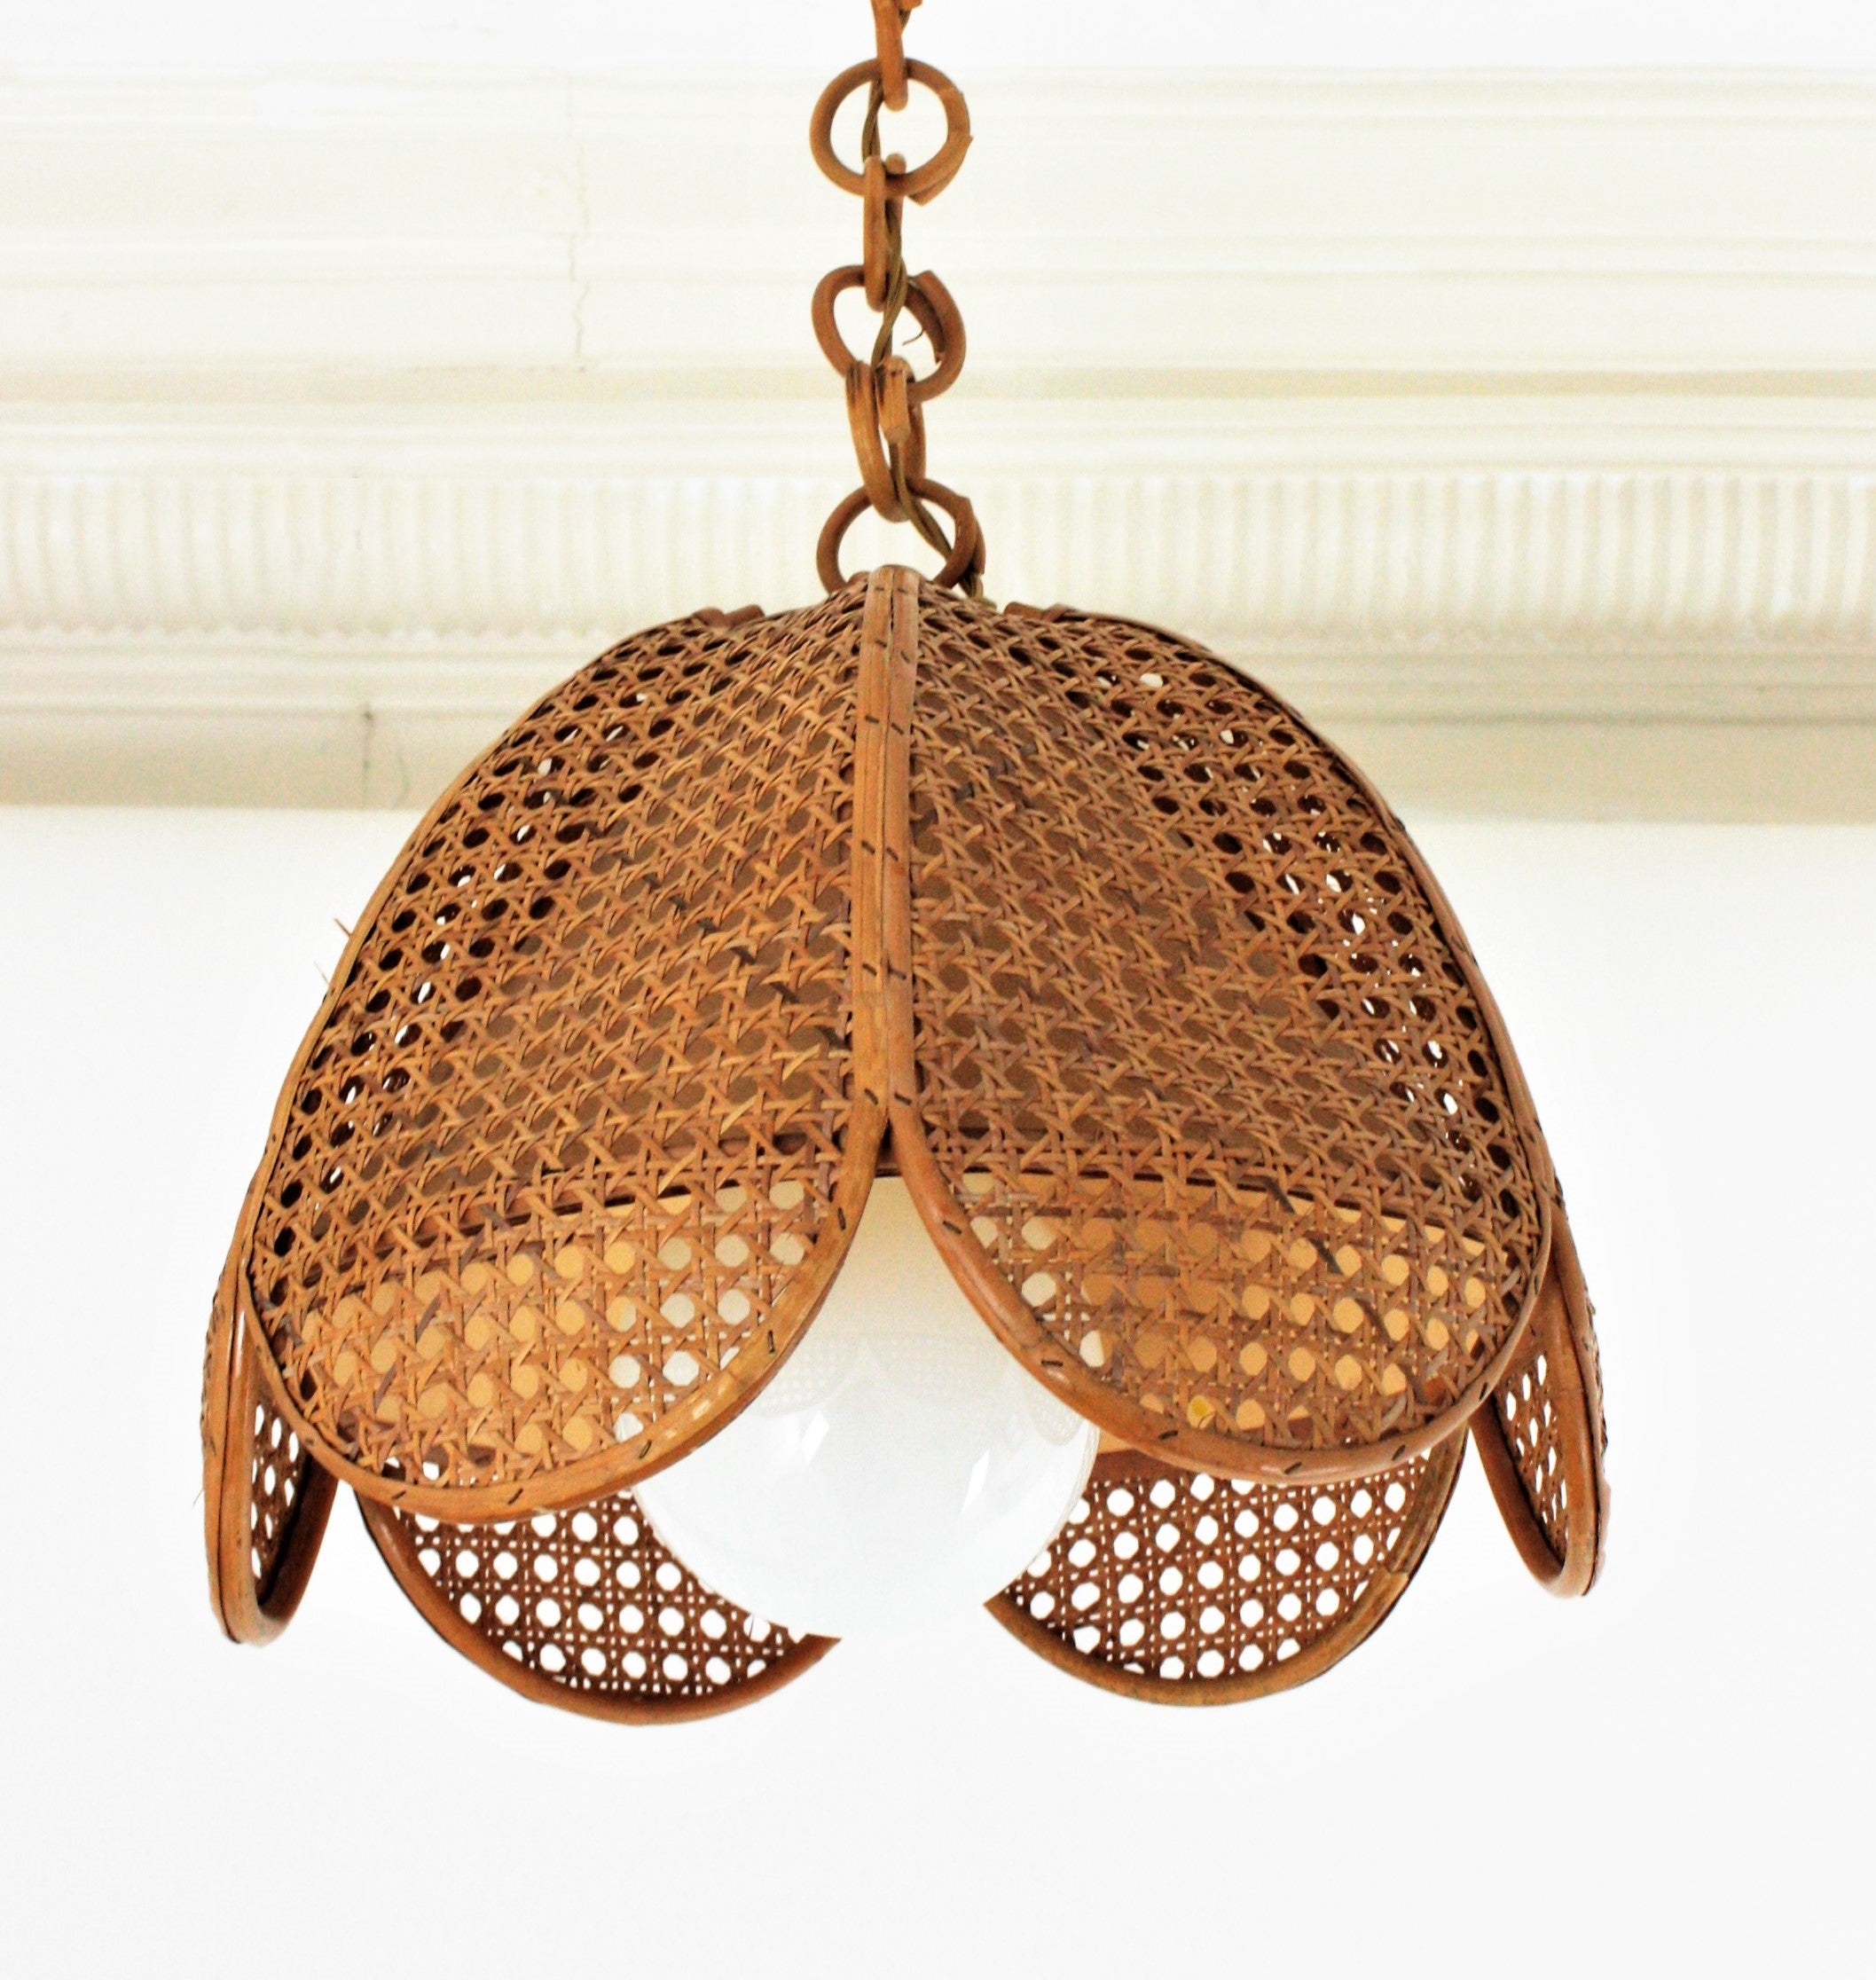 Elegant handcrafted bamboo and rattan / wicker weave flower shaped or palm pendant hanging lamp, Spain, 1960s.
This beautiful suspension lamp features aflower shaped rattan lampshade structure with woven wicker wire panels. It has a inner conical